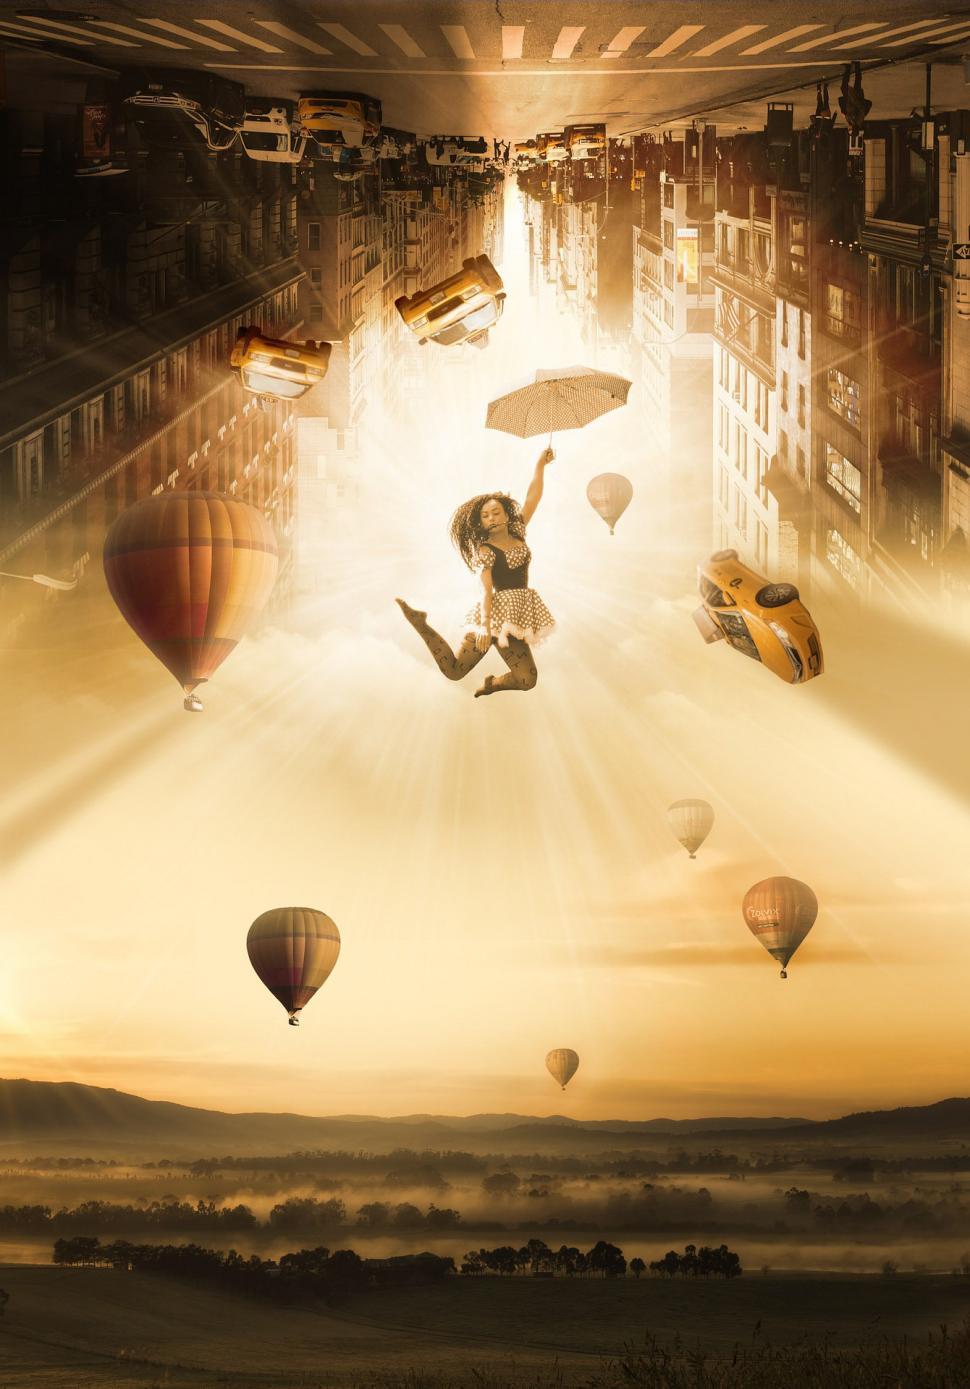 Free Image of Woman Flying Through the Air Surrounded by Hot Air Balloons 